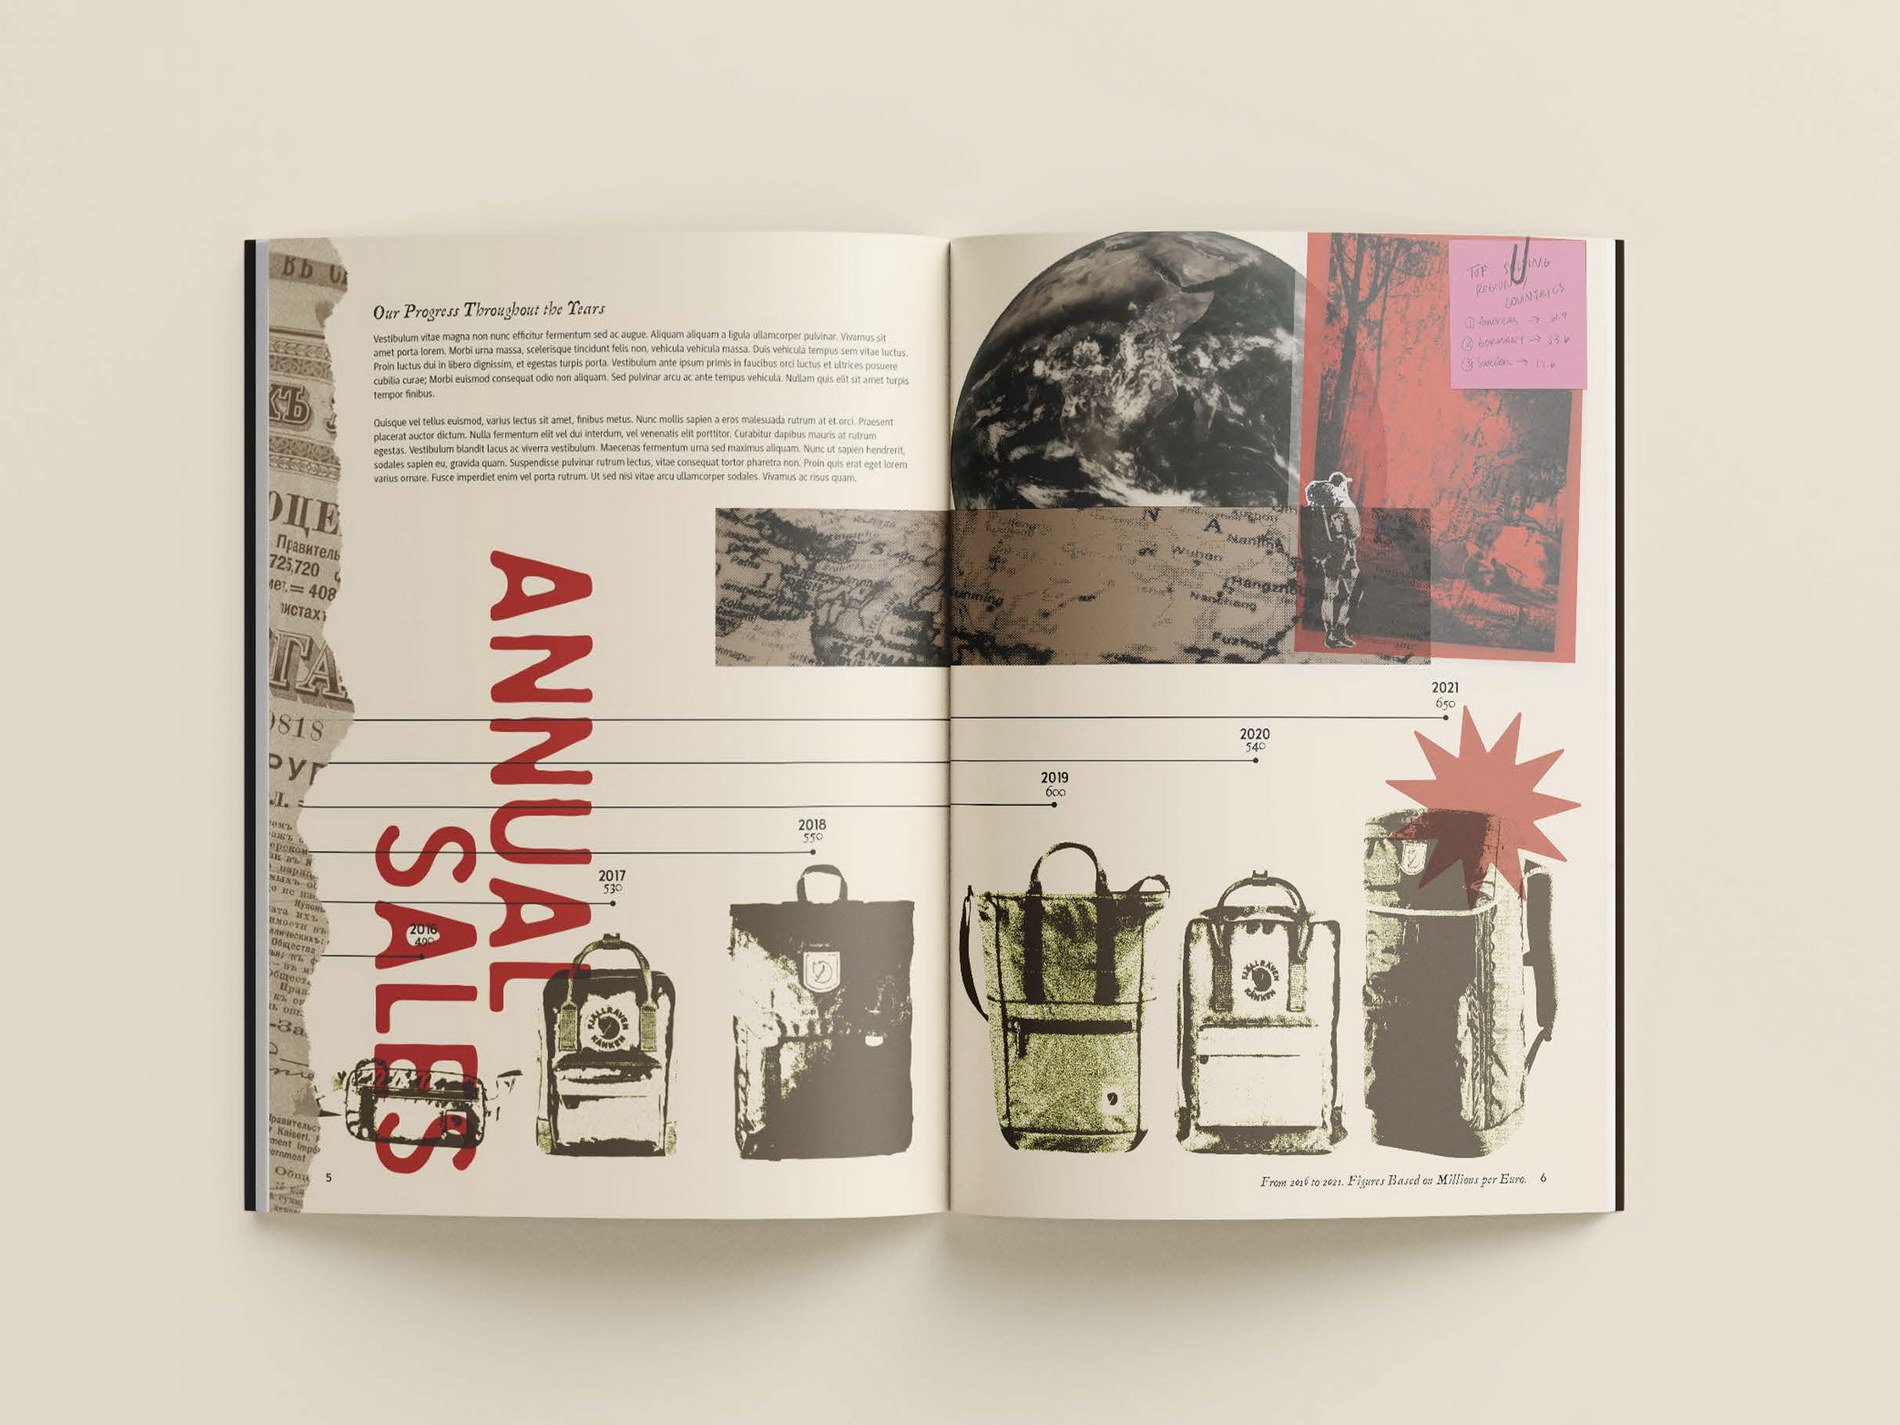 angelica-blanch--fjallraven--annual-report--community-report--communication-design--information-design--advertising--design-in-business-and-marketing--capilano-university-idea-school-of-design-4.jpg